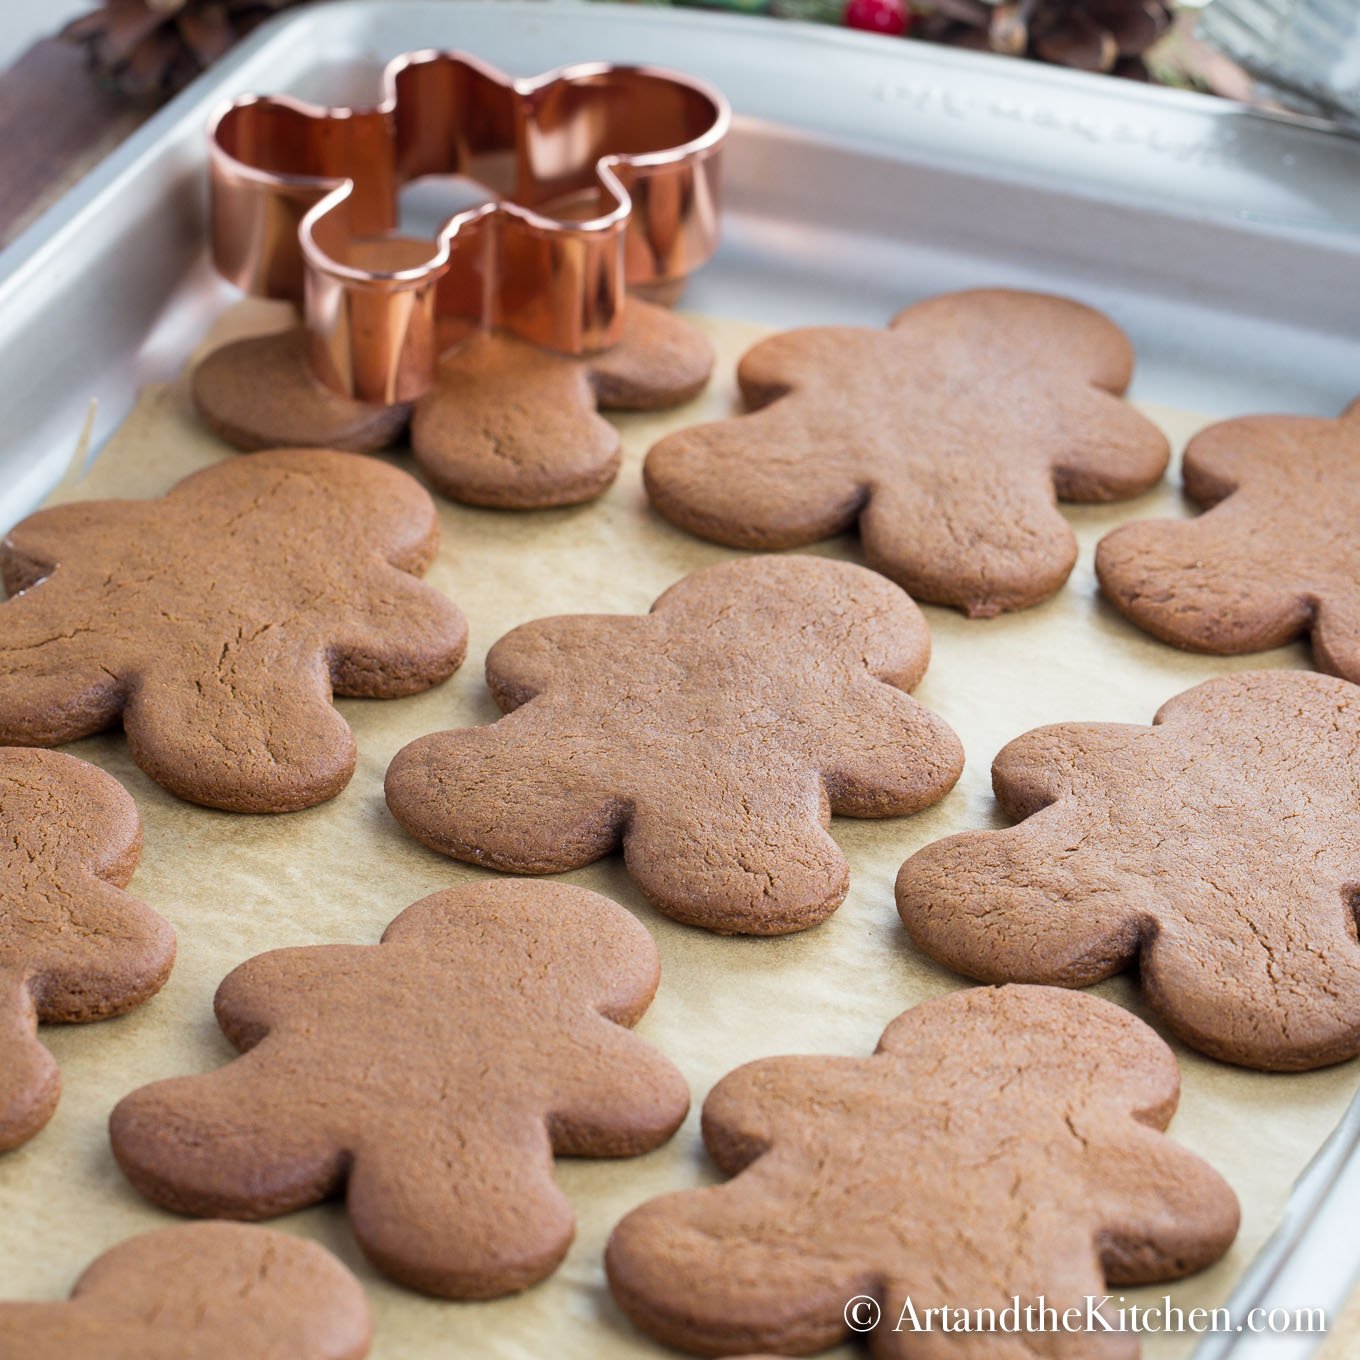 Baked gingerbread men on brown parchment lined baking sheet.